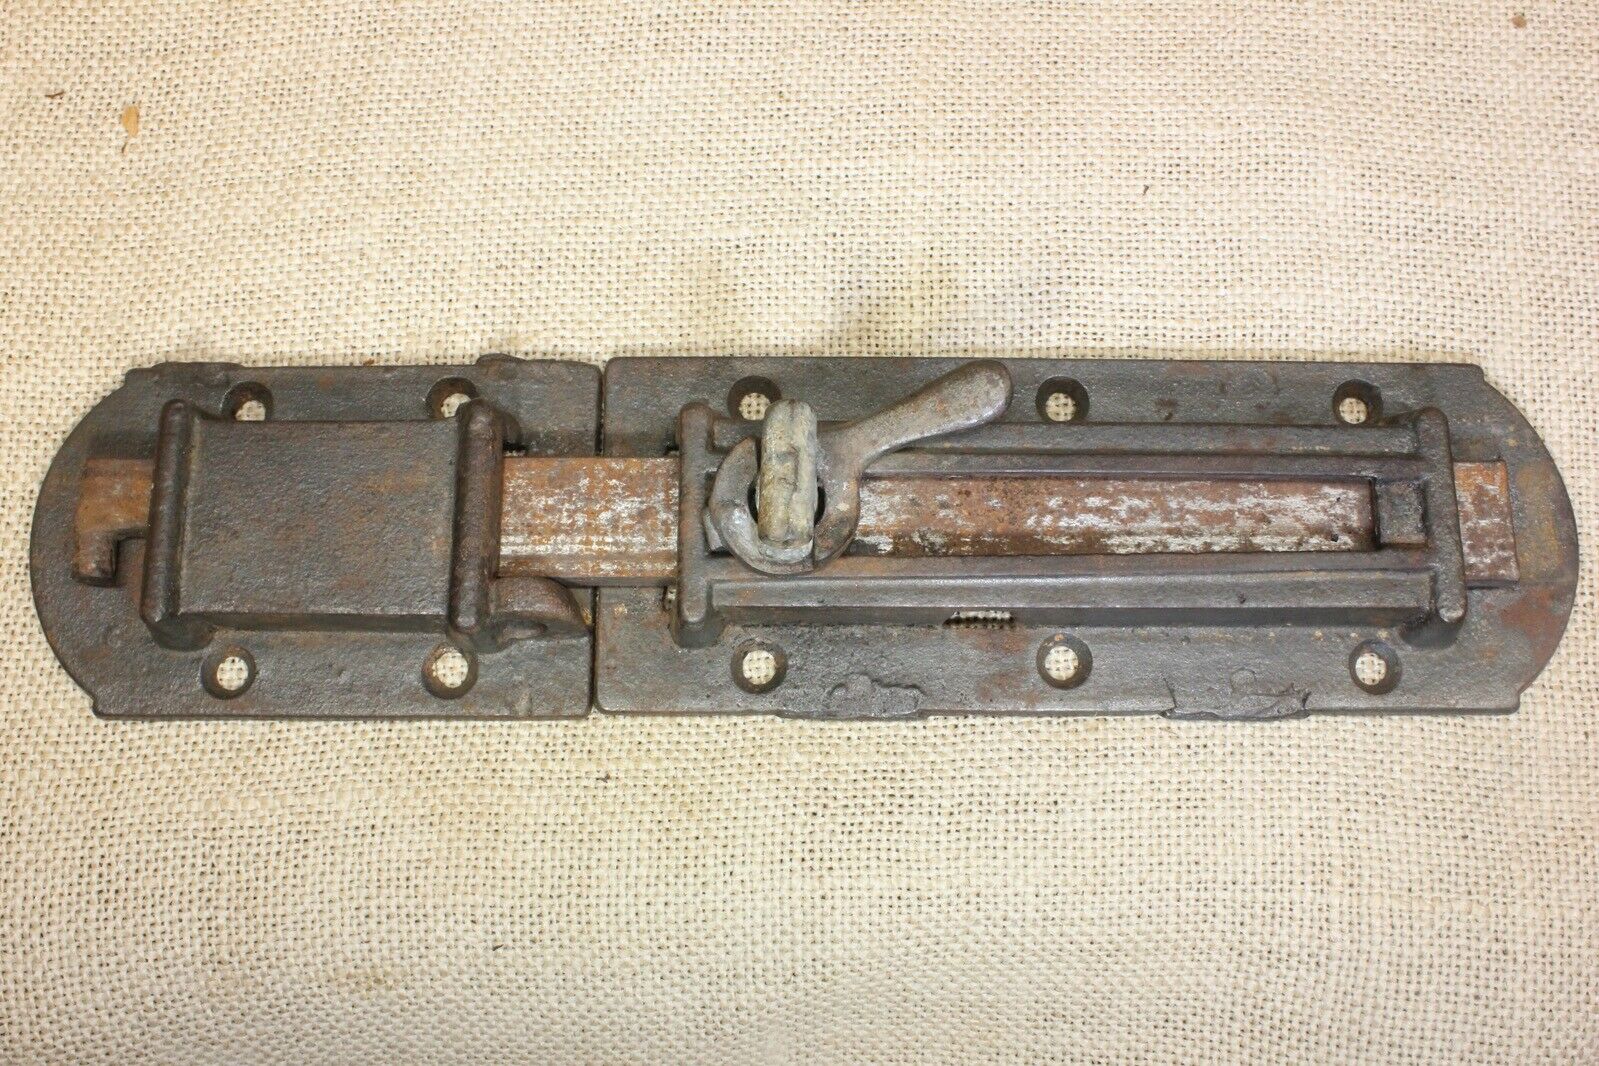 Old House Shutter Latch 1860’s Extra Long Slide Bolt 11 1/8 X 2 5/8” Rustic Iron